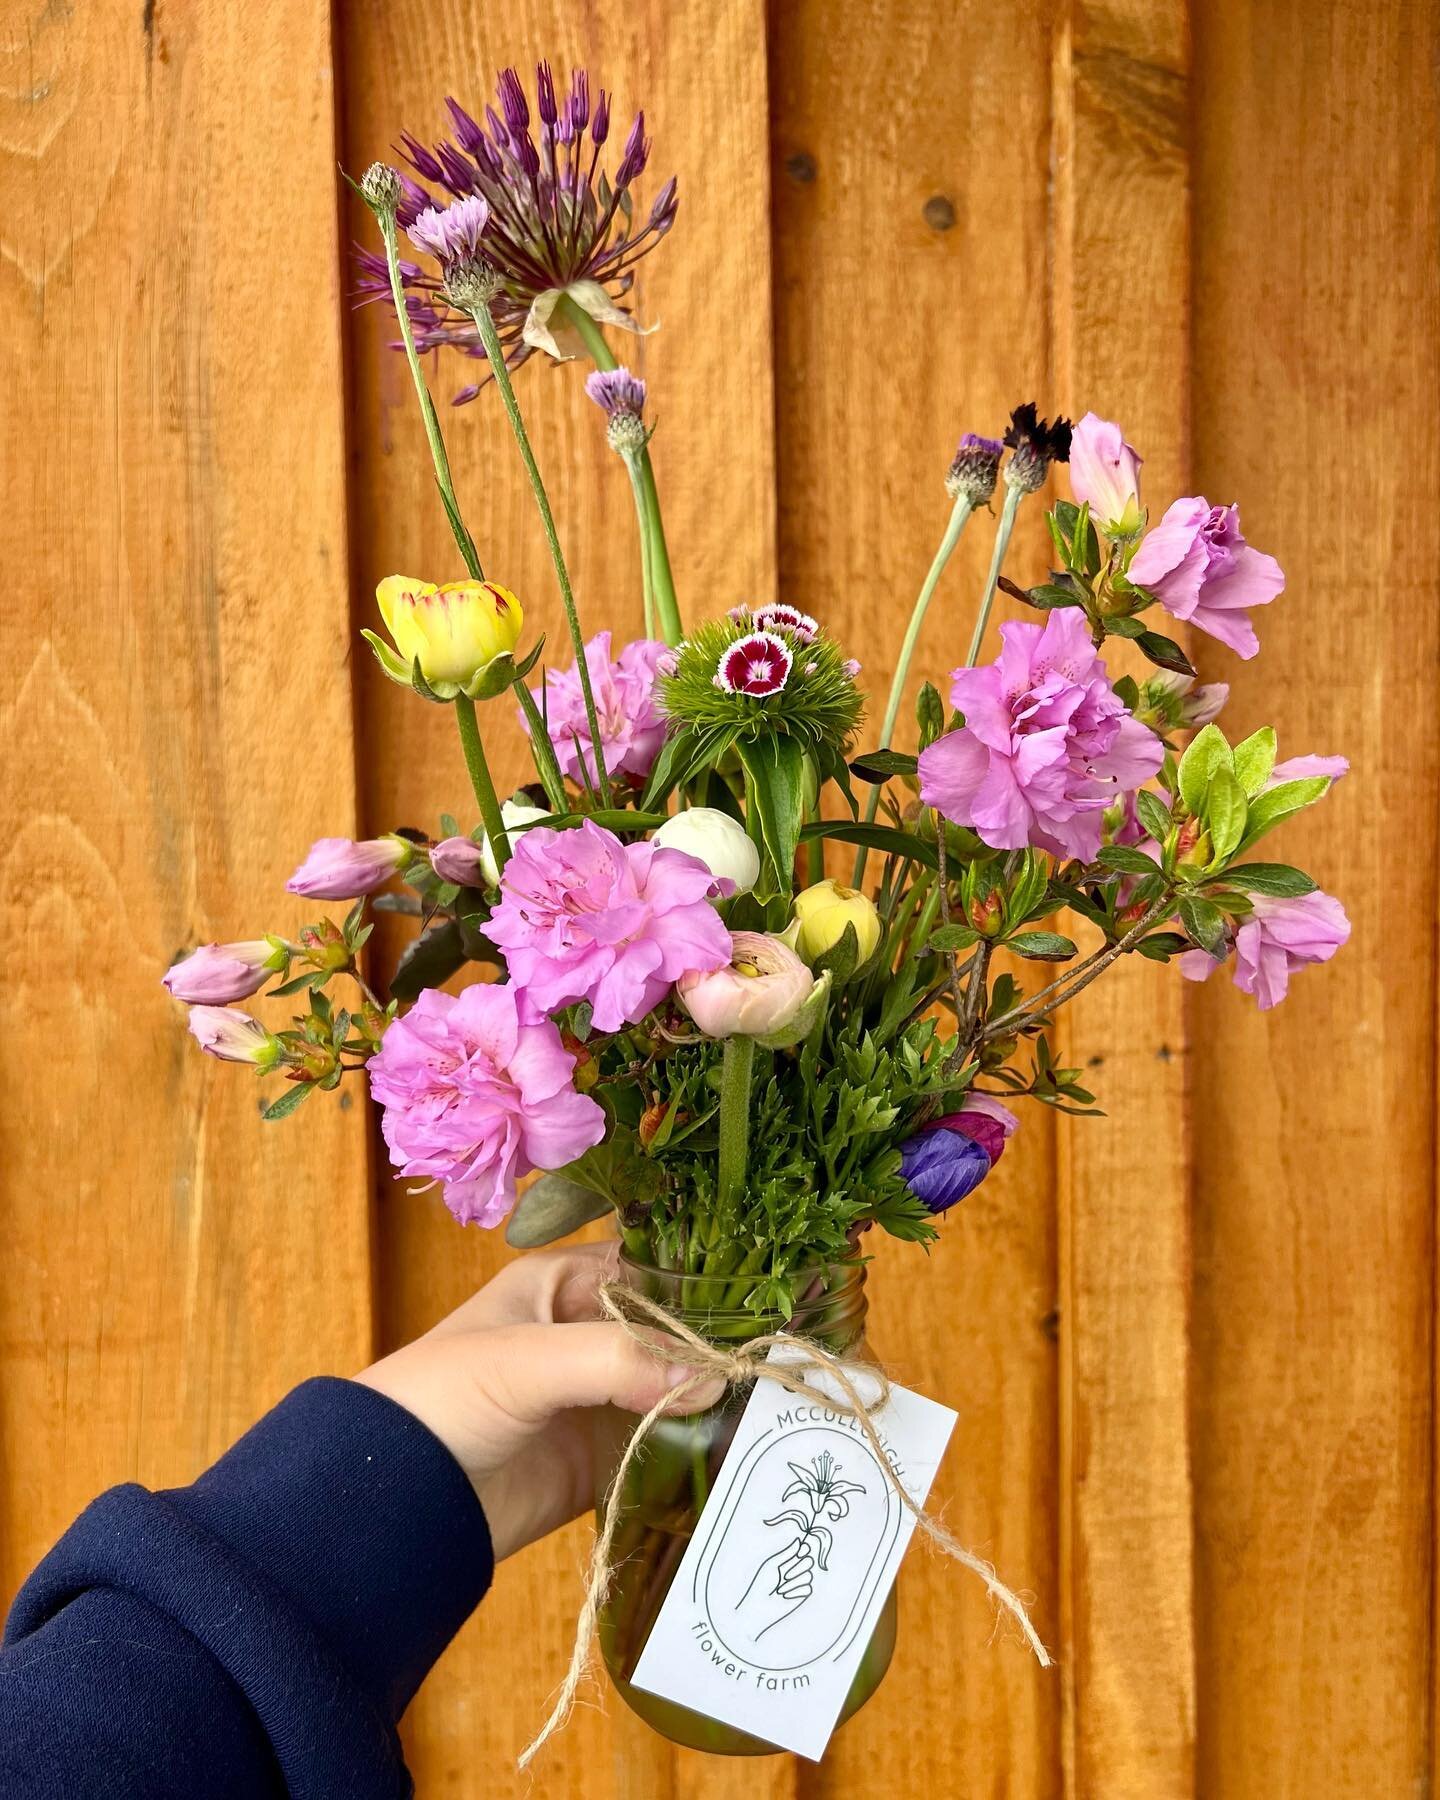 Early summer in a jar: lush azaleas &amp; the first cutting of Sweet William, ranunculus &amp; anemones, bachelor buttons &amp; allium. Everyone who placed an order this weekend gets to enjoy a flush of azaleas. Enjoy them - they are perfect for cutt